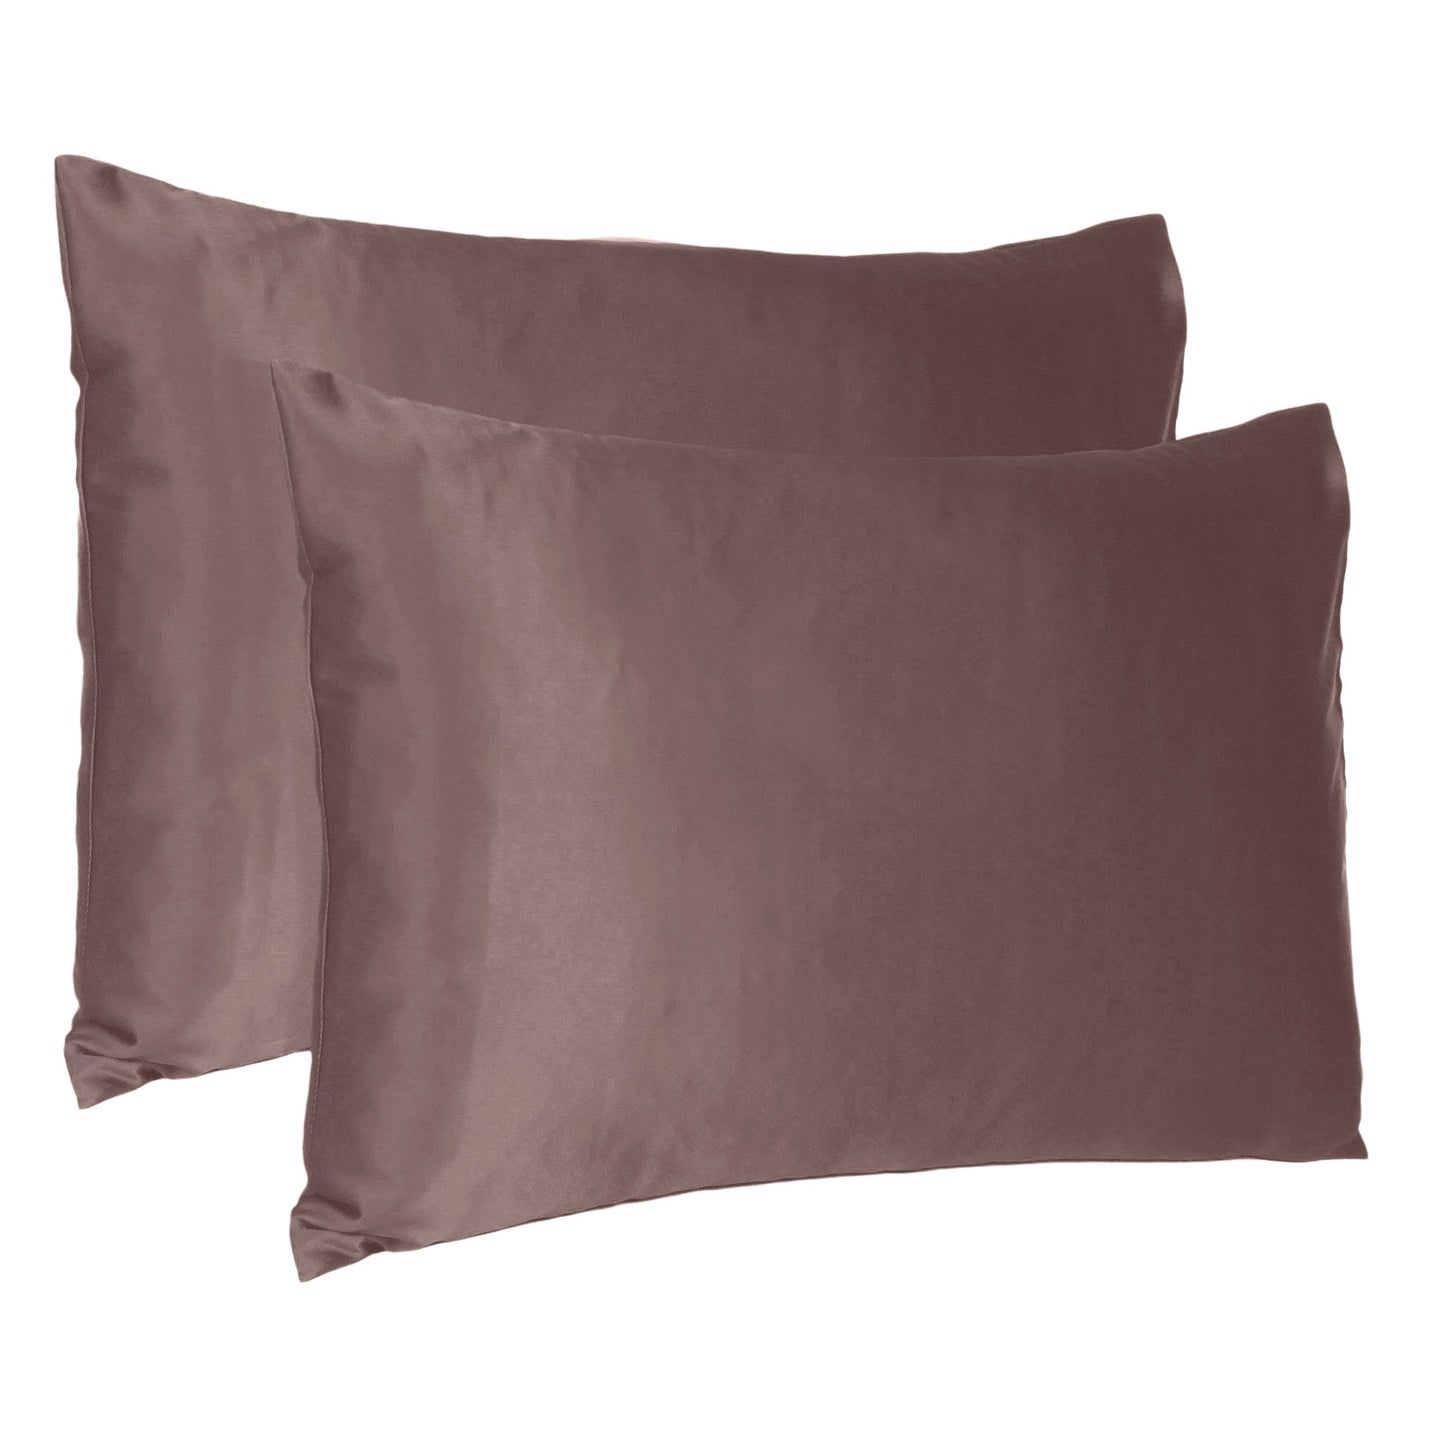 Luxury Soft Plain Satin Silk Pillowcases in Set of 2 - Withered Rose